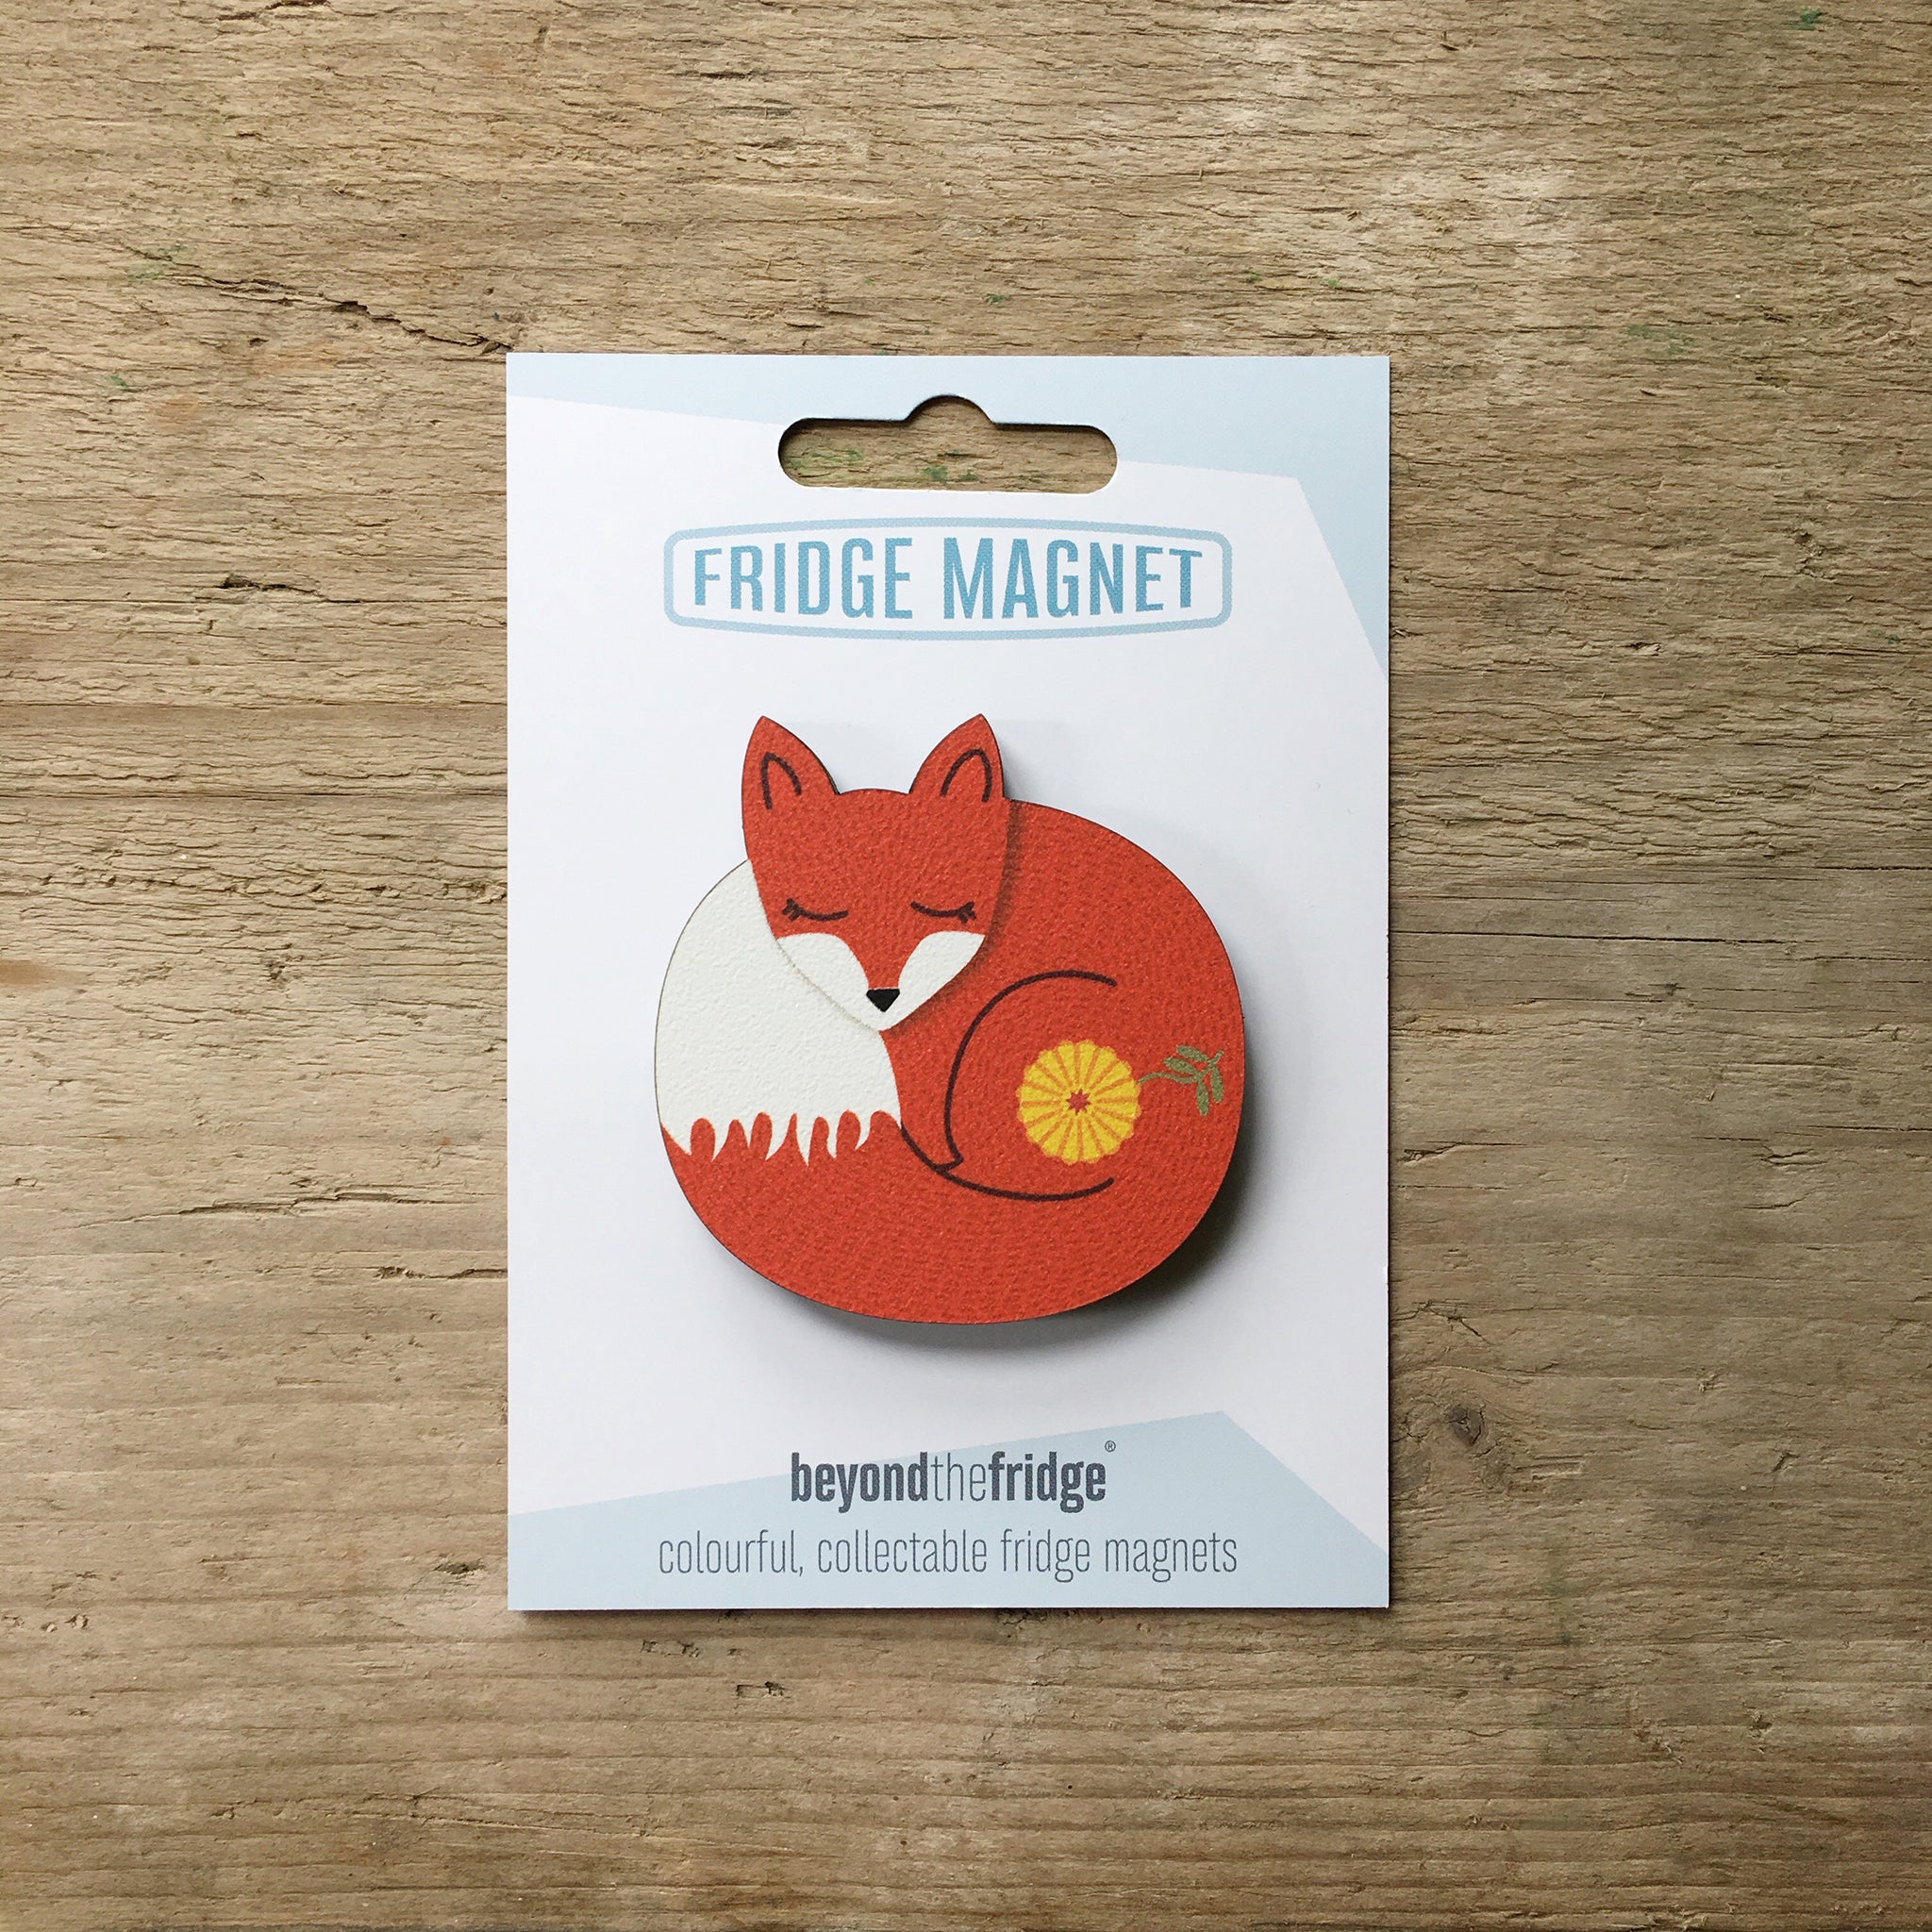 A sleeping fox design plywood fridge magnet by Beyond the Fridge in it’s pack on a wooden background